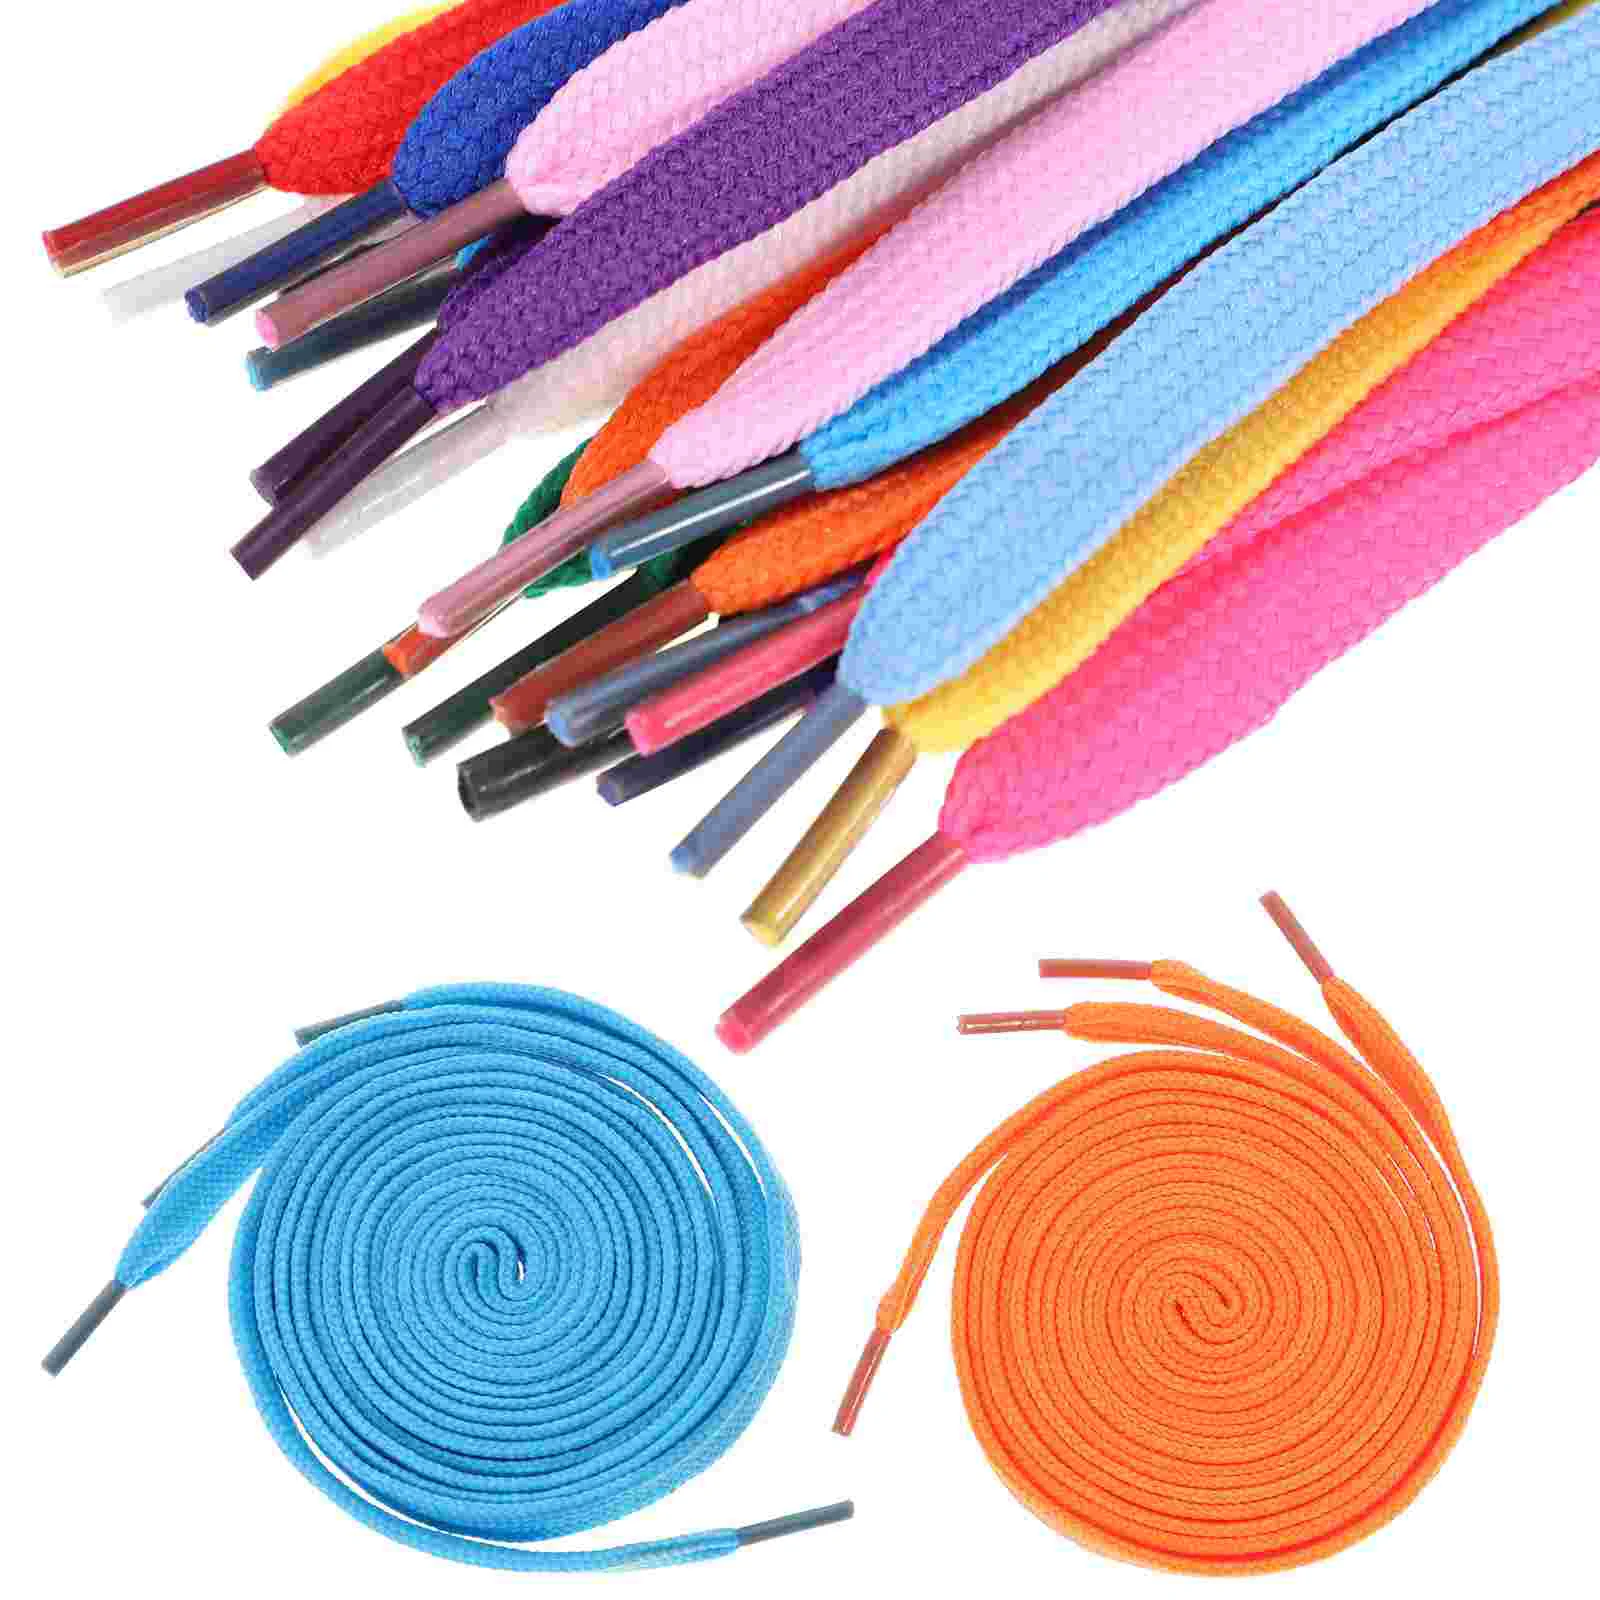 of Replacement Flat Shoelaces Shoe Laces Strings for Sports Shoes /Boots /Sneakers /Skates (Assorted Colors) 1pair colorful flat shoe laces rainbow gradient shoelaces for high top canvas sneaker laces shoes accessories shoelace strings